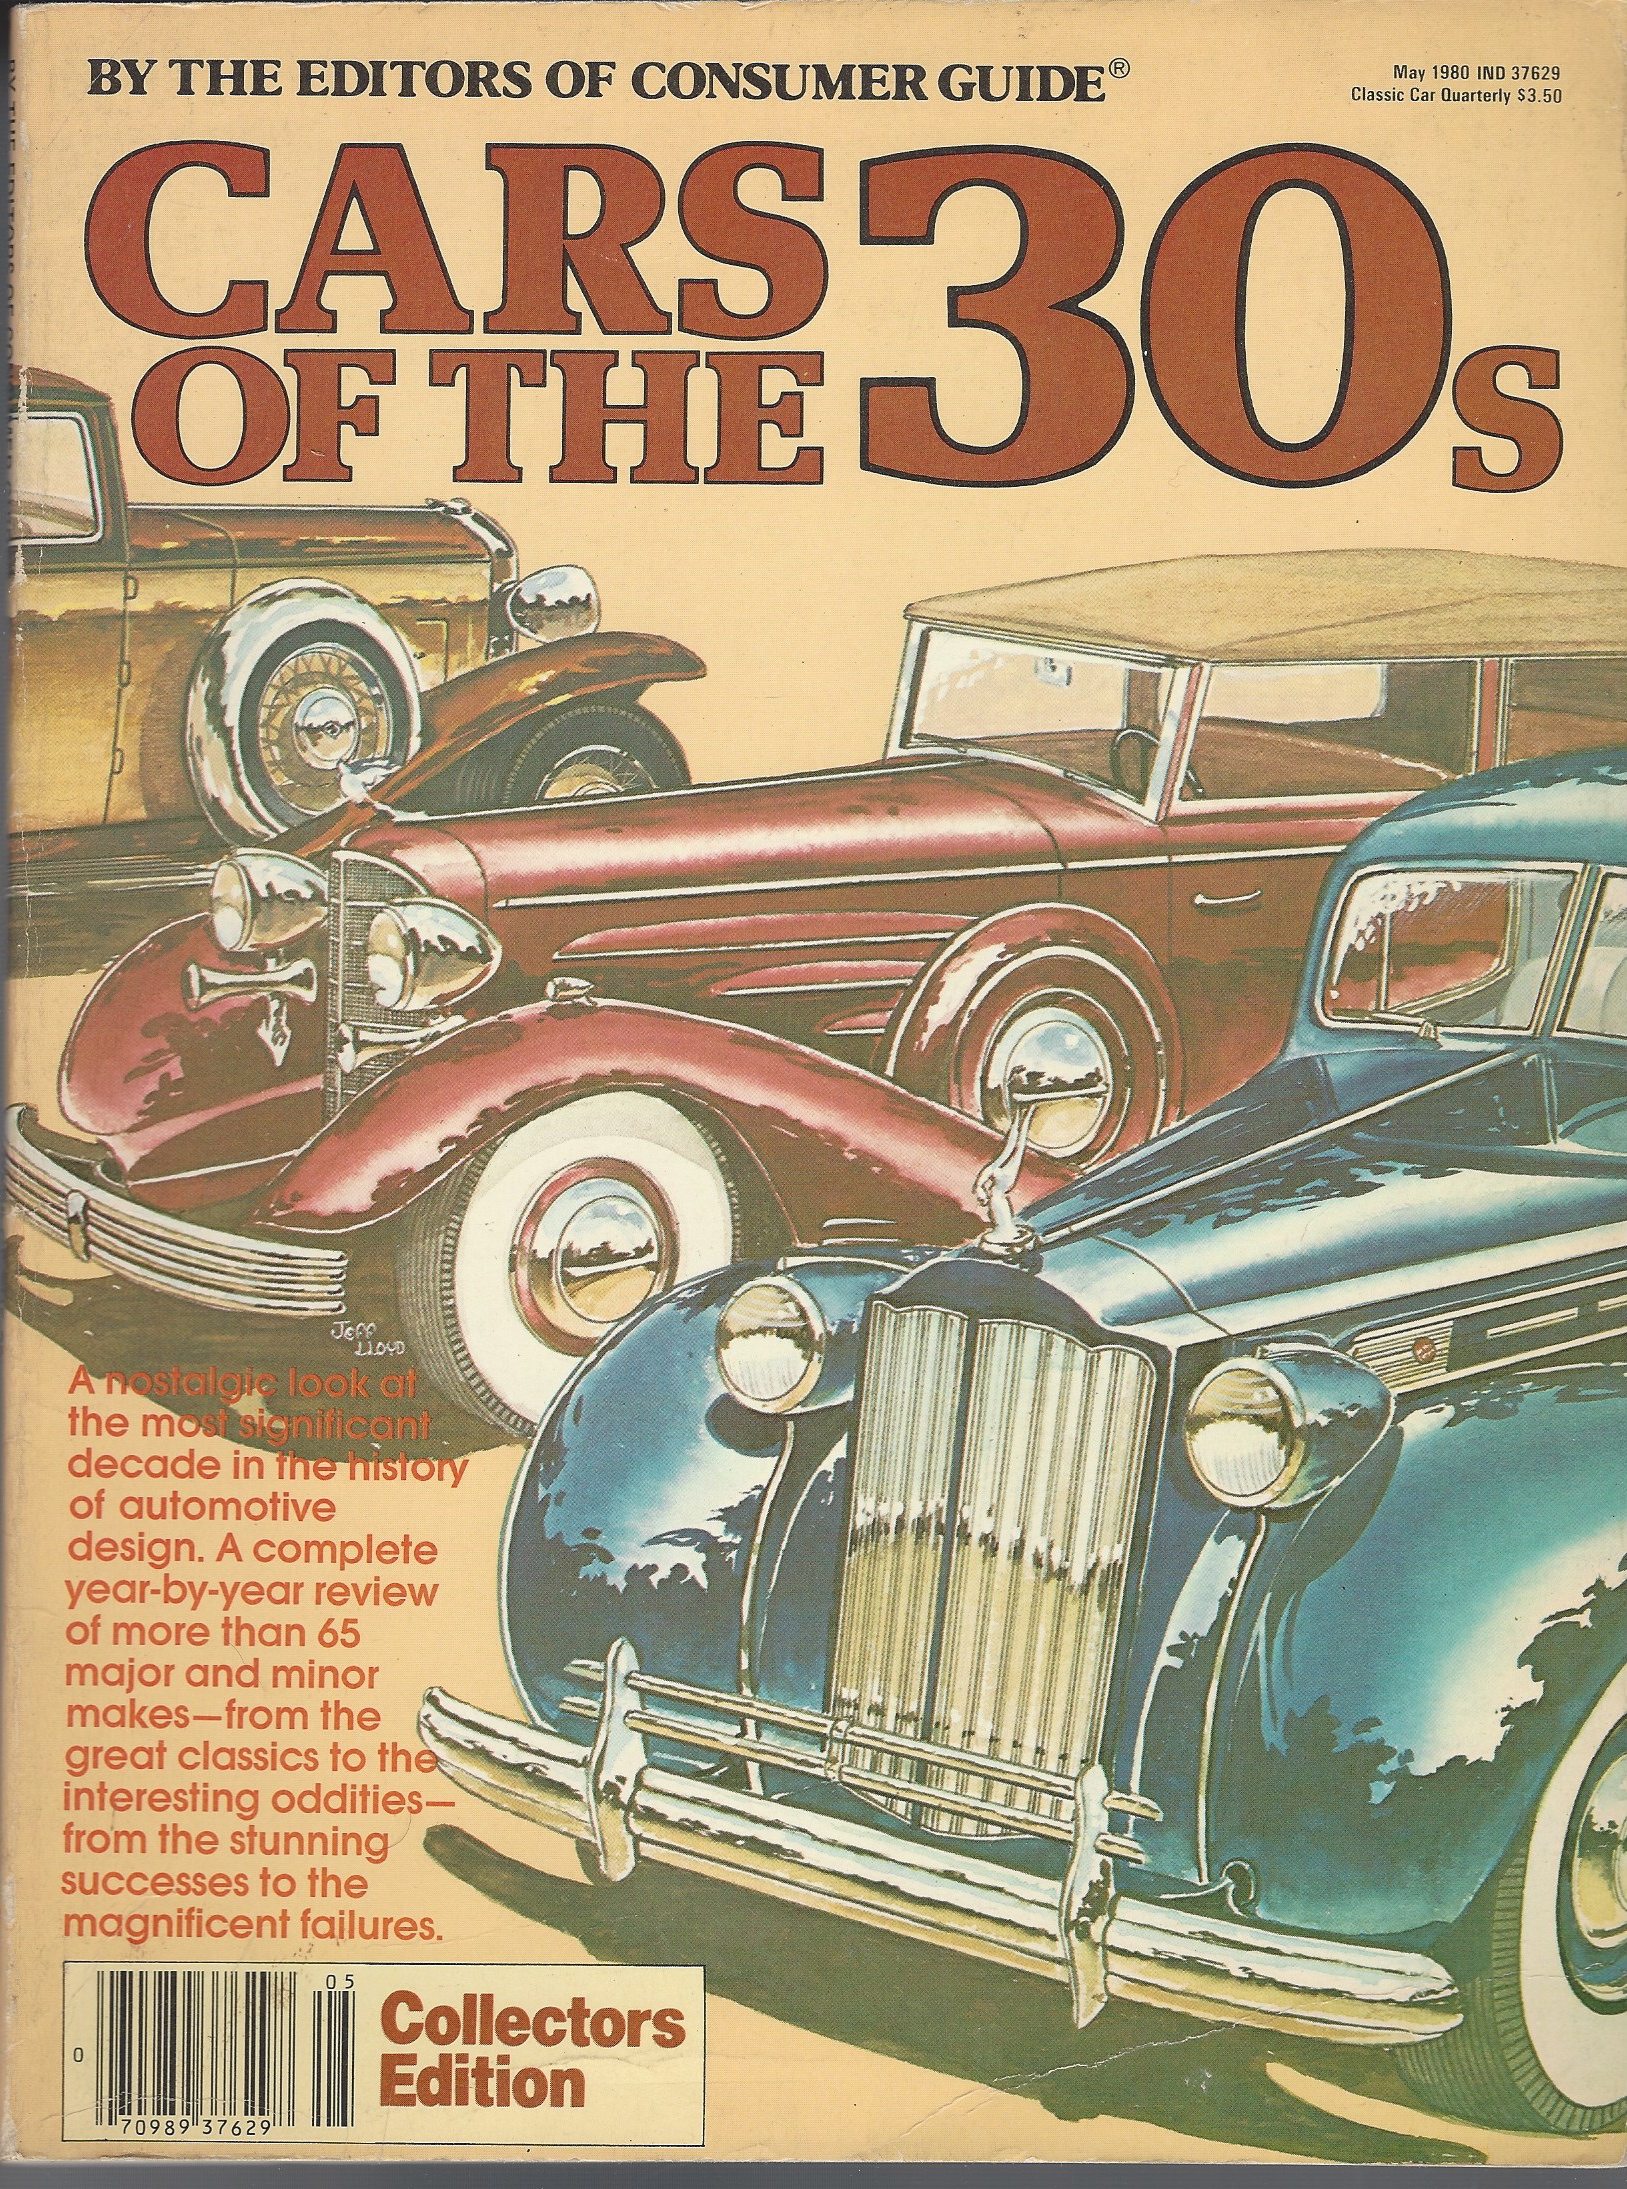 CONSUMER GUIDE (EDITORS) - Cars of the 30s